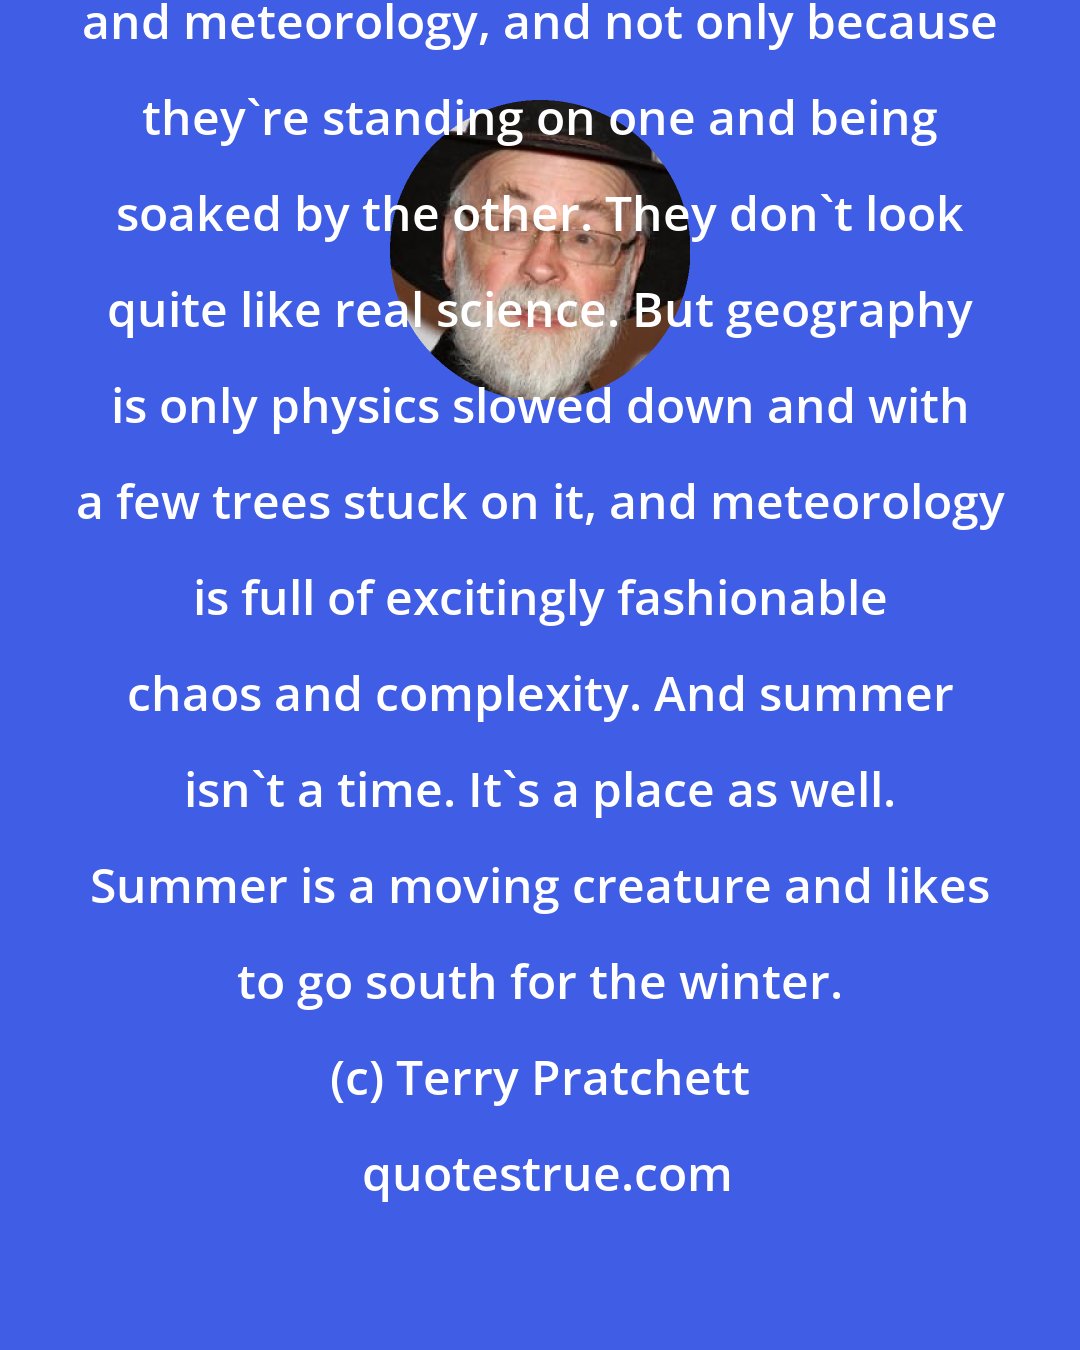 Terry Pratchett: People look down on stuff like geography and meteorology, and not only because they're standing on one and being soaked by the other. They don't look quite like real science. But geography is only physics slowed down and with a few trees stuck on it, and meteorology is full of excitingly fashionable chaos and complexity. And summer isn't a time. It's a place as well. Summer is a moving creature and likes to go south for the winter.